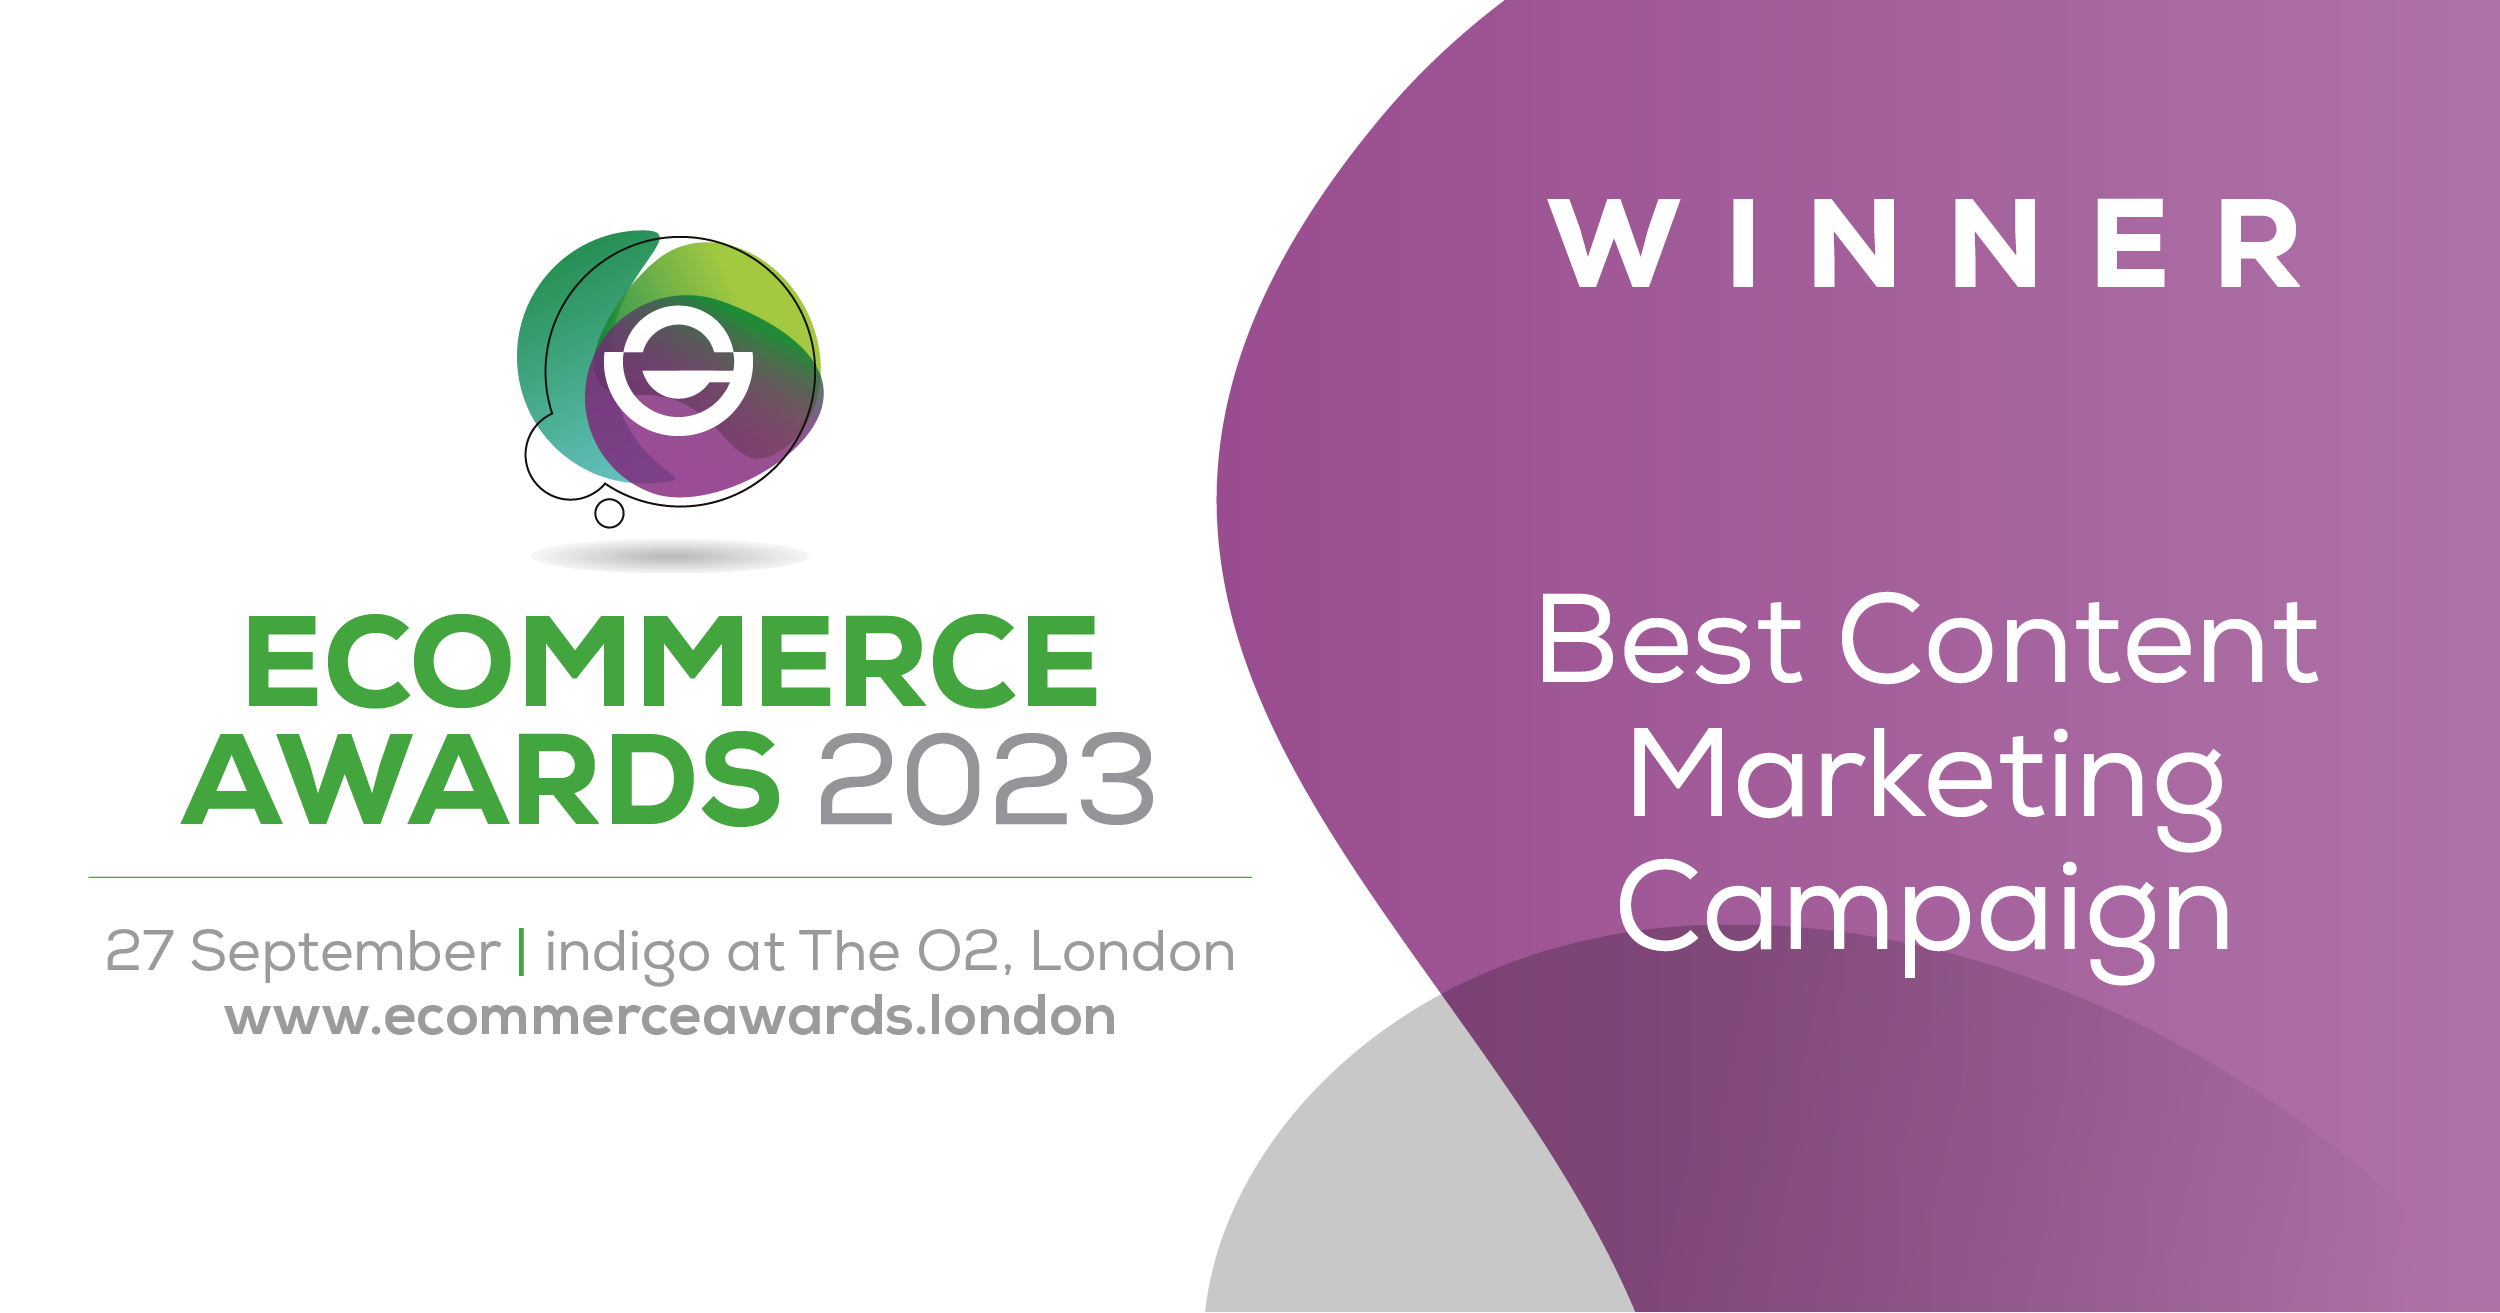 Ecommerce Awards - Winners of the Best Content Marketing Campaign